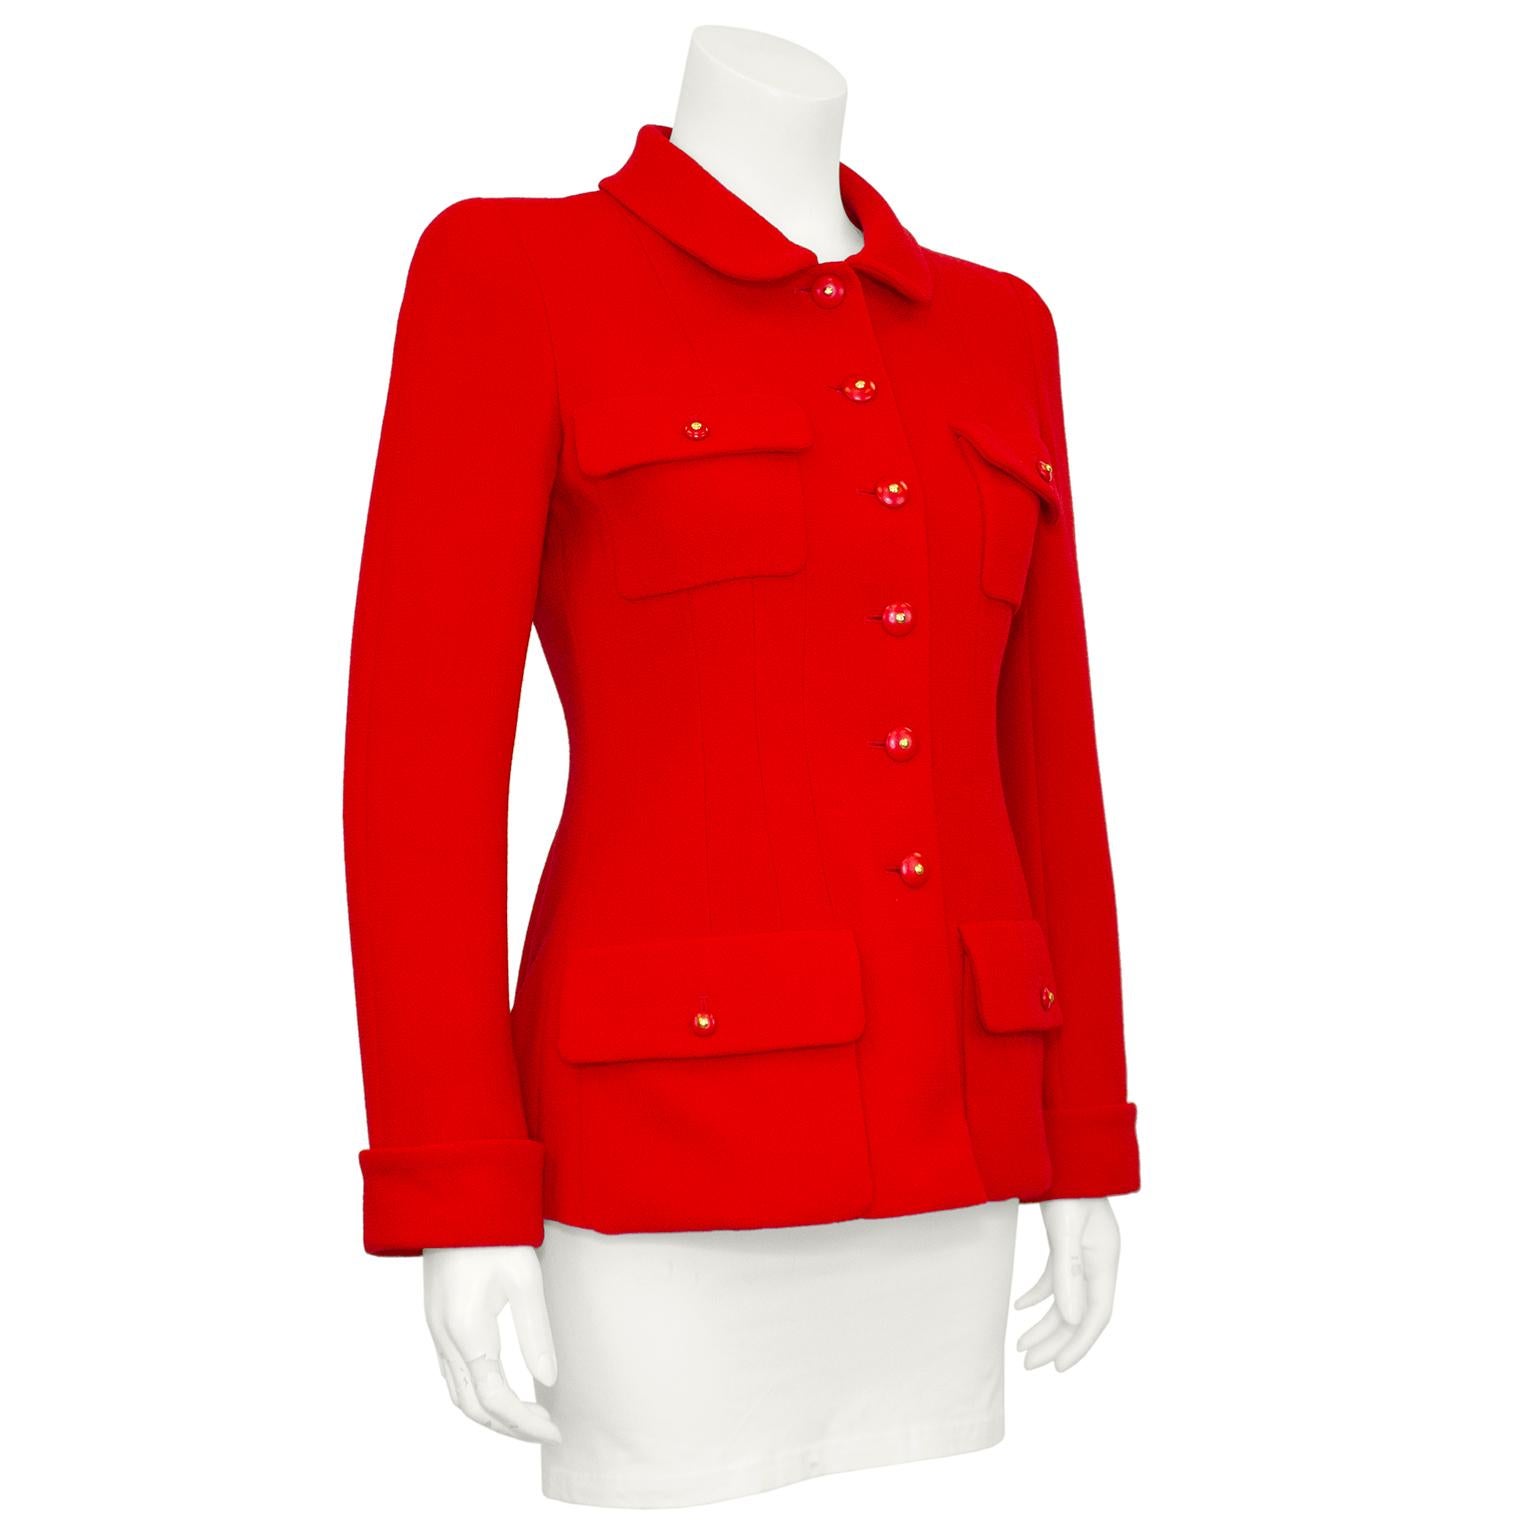 This 1990s Chanel jacket is classic and timeless. Dating from the early 1990s, this Chanel jacket is a striking bright red boucle. Rounded Peter Pan collar with two patches pockets at the bust and two patch pockets at the hips. Folded cuffs and